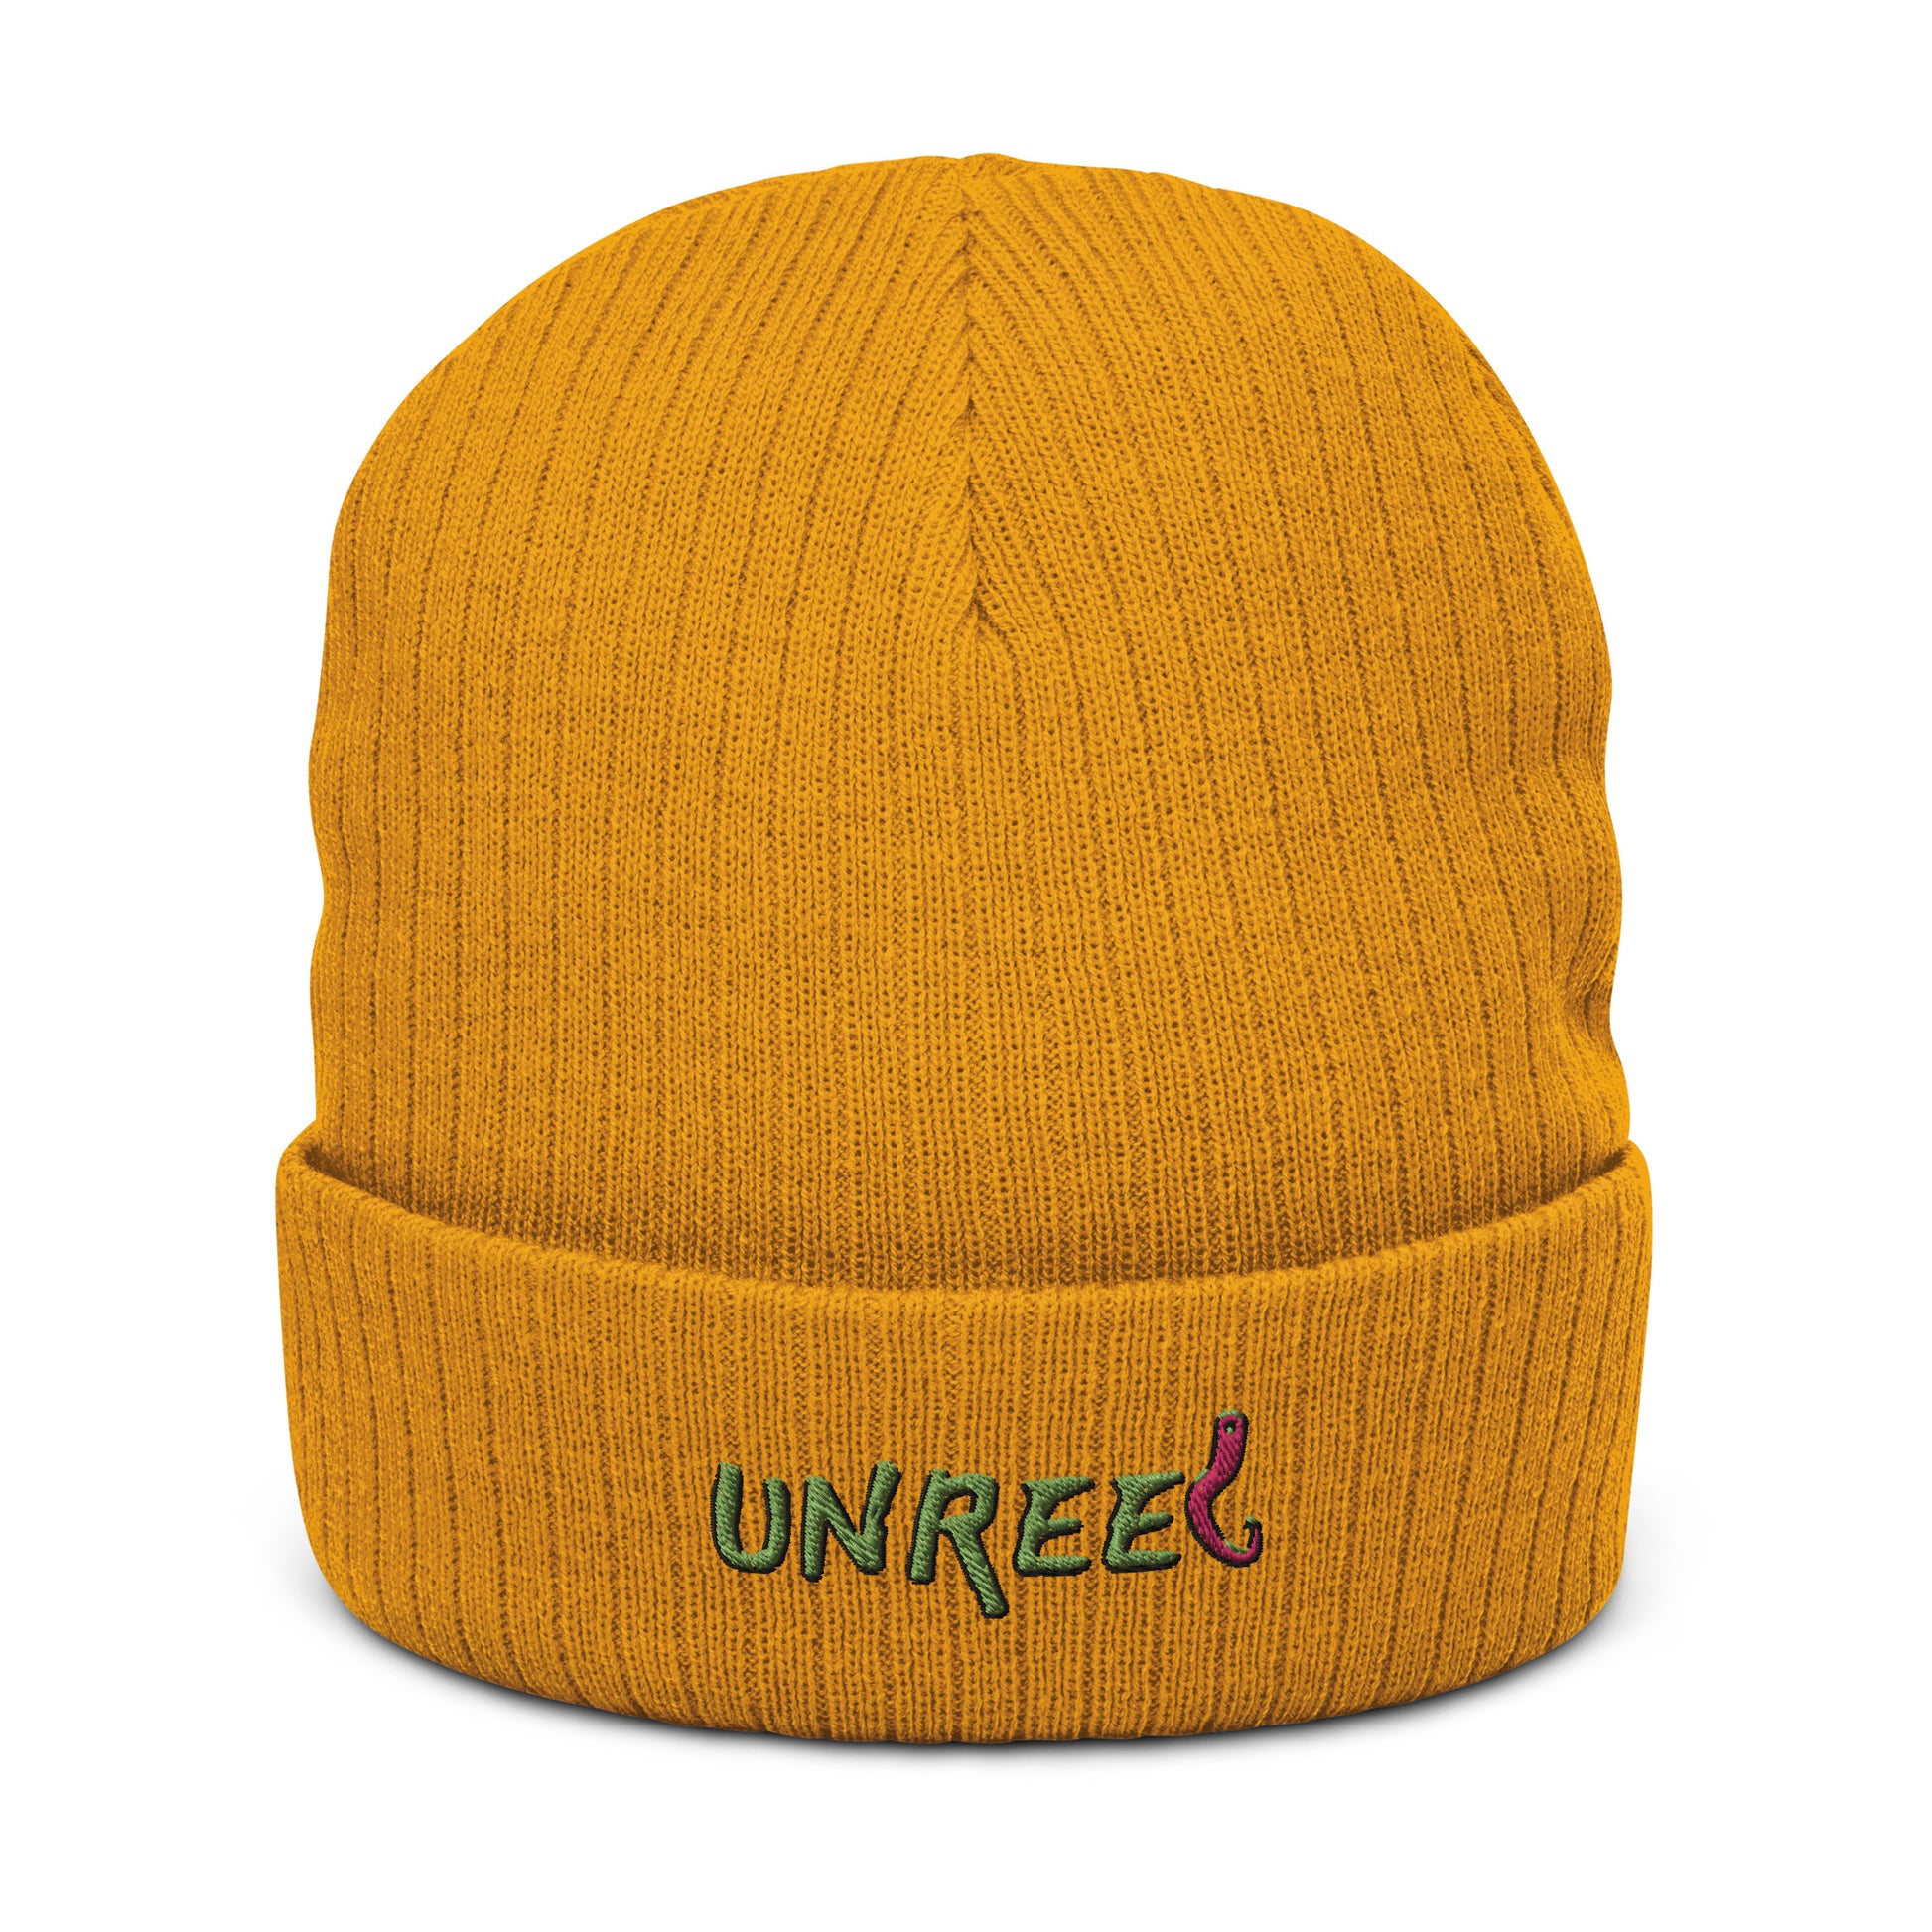 Unreel knit beanie - Unreel Clothes for fishing and the outdoors.